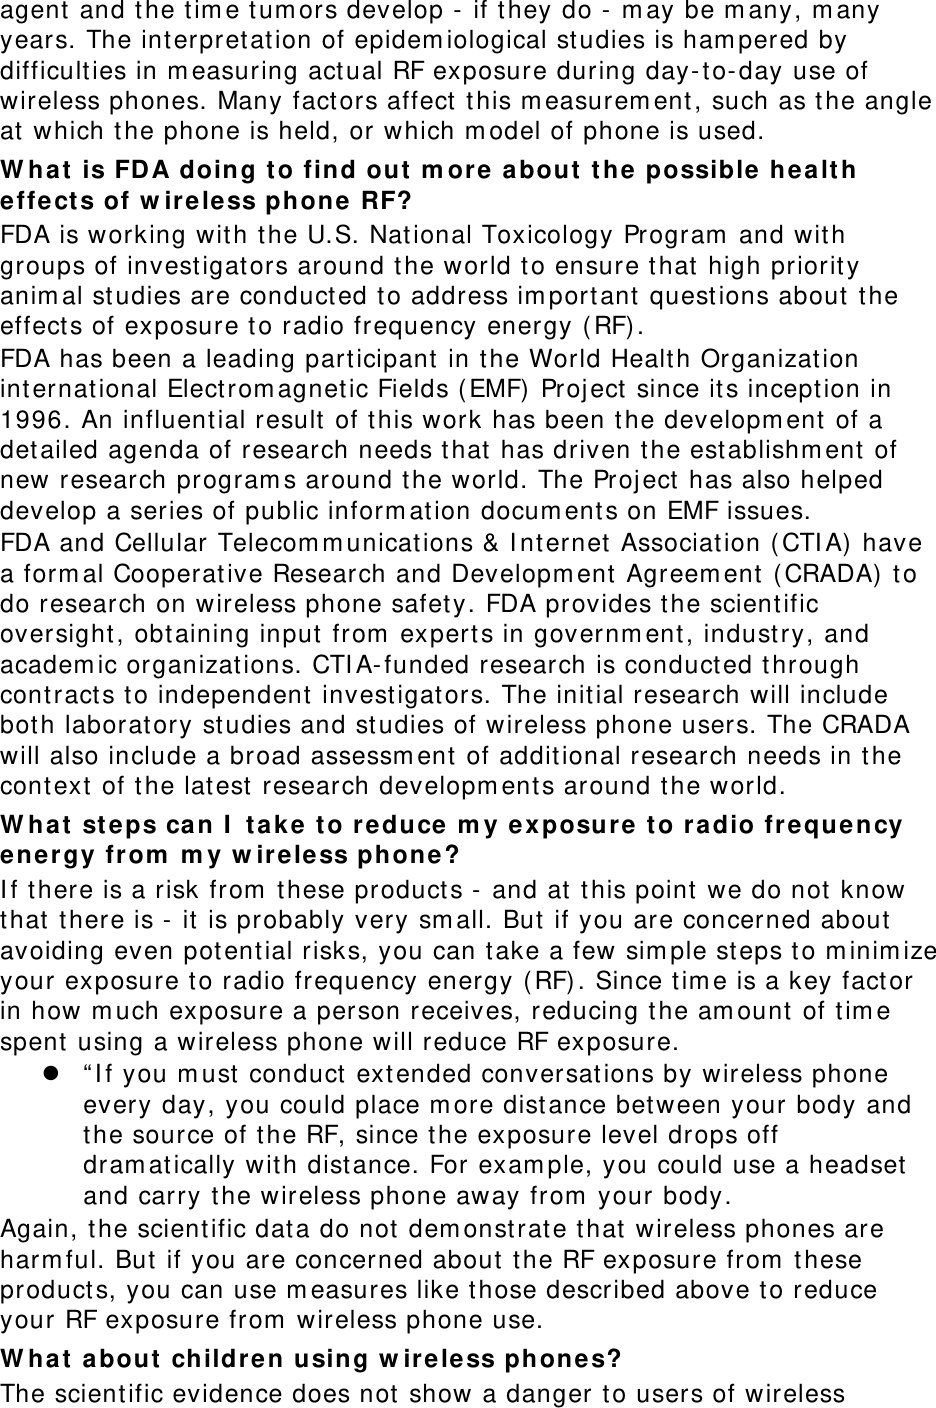 agent  and the tim e tum ors develop - if t hey do -  m ay be m any, m any years. The interpretation of epidem iological studies is ham pered by difficulties in m easuring act ual RF exposure during day- t o-day use of wireless phones. Many fact ors affect  t his m easurem ent , such as t he angle at  which t he phone is held, or which m odel of phone is used. W ha t is FD A doing t o find out  m ore about t he possible  he alt h effects of w ire less phone RF? FDA is working wit h the U.S. National Toxicology Program  and with groups of invest igat ors around the world t o ensure t hat high priority anim al studies are conduct ed t o address im port ant quest ions about  t he effect s of exposure to radio frequency energy ( RF). FDA has been a leading participant  in the World Health Organization internat ional Elect rom agnet ic Fields ( EMF)  Project since its inception in 1996. An influent ial result of t his work has been t he developm ent  of a det ailed agenda of research needs that  has driven t he establishm ent  of new research program s around t he world. The Project has also helped develop a series of public inform ation docum ents on EMF issues. FDA and Cellular Telecom m unicat ions &amp; I nt ernet  Associat ion ( CTI A) have a form al Cooperative Research and Developm ent  Agreem ent  ( CRADA)  t o do research on wireless phone safety. FDA provides t he scient ific oversight , obt aining input  from  expert s in governm ent , industry, and academ ic organizat ions. CTI A- funded research is conducted t hrough cont ract s t o independent  invest igat ors. The initial research will include both laboratory studies and studies of wireless phone users. The CRADA will also include a broad assessm ent  of additional research needs in t he cont ext  of the lat est  research developm ents around t he world. W ha t st eps ca n I  t ake t o r educe m y e xposure to radio frequency ene rgy from  m y w irele ss phone ? I f t here is a risk from  t hese product s -  and at  t his point  we do not  know that there is -  it is probably very sm all. But if you are concerned about  avoiding even pot ent ial risks, you can t ake a few sim ple st eps t o m inim ize your exposure t o radio frequency energy ( RF). Since tim e is a key fact or in how m uch exposure a person receives, reducing t he am ount of t im e spent using a wireless phone will reduce RF exposure.  “ I f you m ust  conduct ext ended conversations by wireless phone every day, you could place m ore dist ance bet ween your body and the source of t he RF, since t he exposure level drops off dram atically wit h dist ance. For exam ple, you could use a headset and carry the wireless phone away from  your body. Again, the scient ific dat a do not  dem onstrate t hat wireless phones are harm ful. But if you are concerned about  the RF exposure from  t hese product s, you can use m easures like those described above t o reduce your RF exposure from  wireless phone use. W ha t about children using w ireless ph ones? The scientific evidence does not show a danger t o users of wireless 